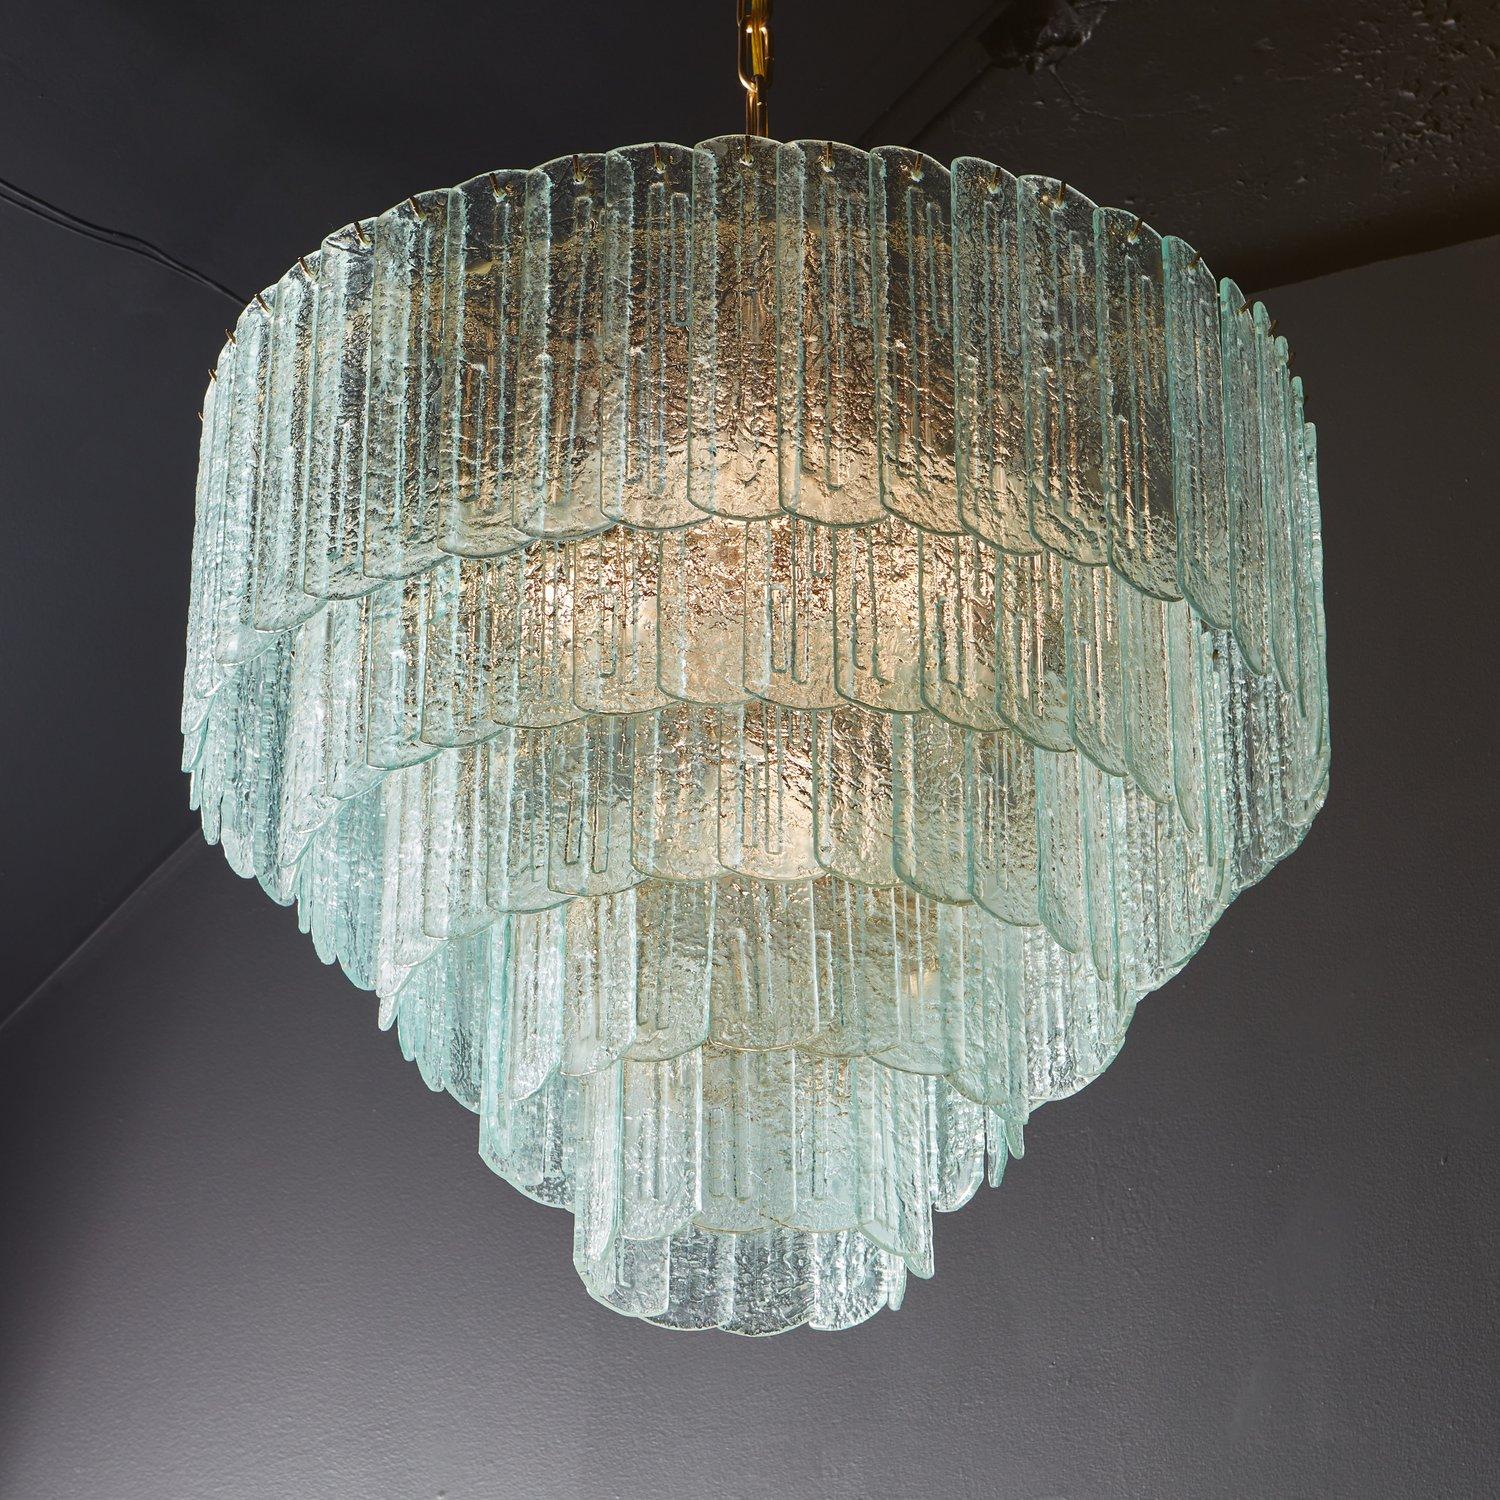 A stunning vintage chandelier featuring over 100 handblown Murano frosted glass pieces with curved edges and textural linear details. The glass hangs in five tiers from a bronze frame and has a beautiful green hue. Sourced in Italy, 20th